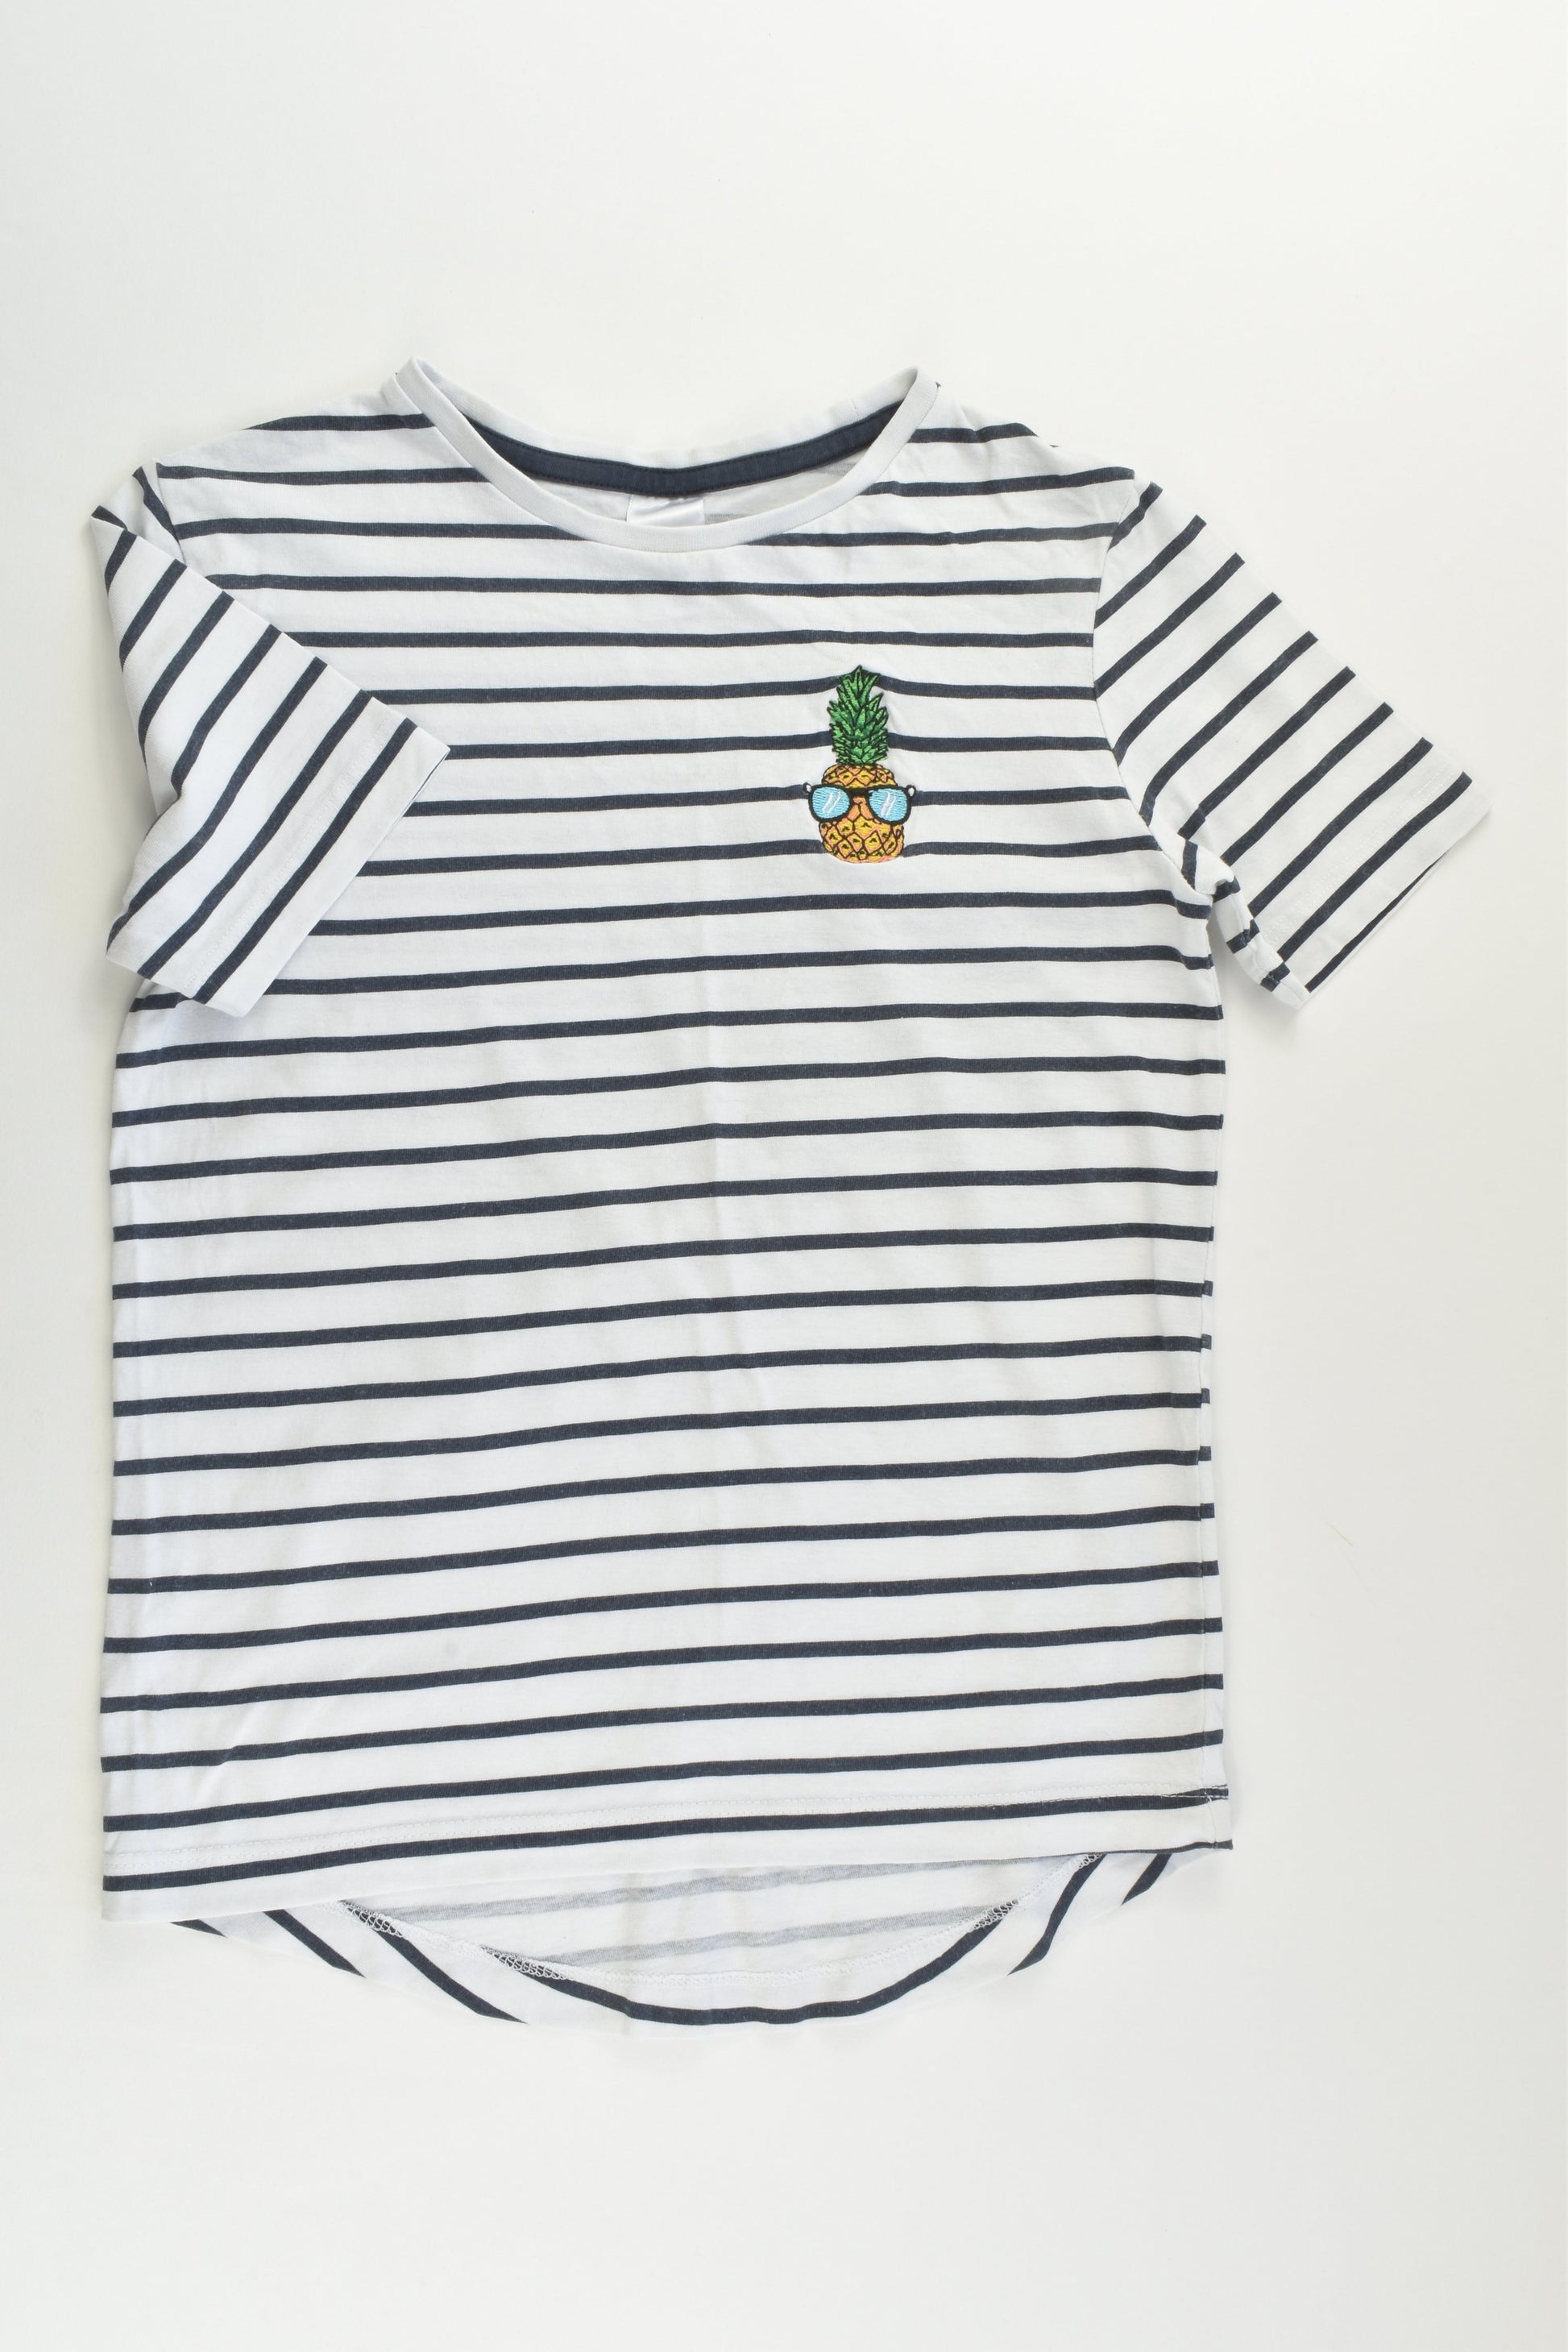 Target Size 7 Striped Pineapple Patch T-shirt